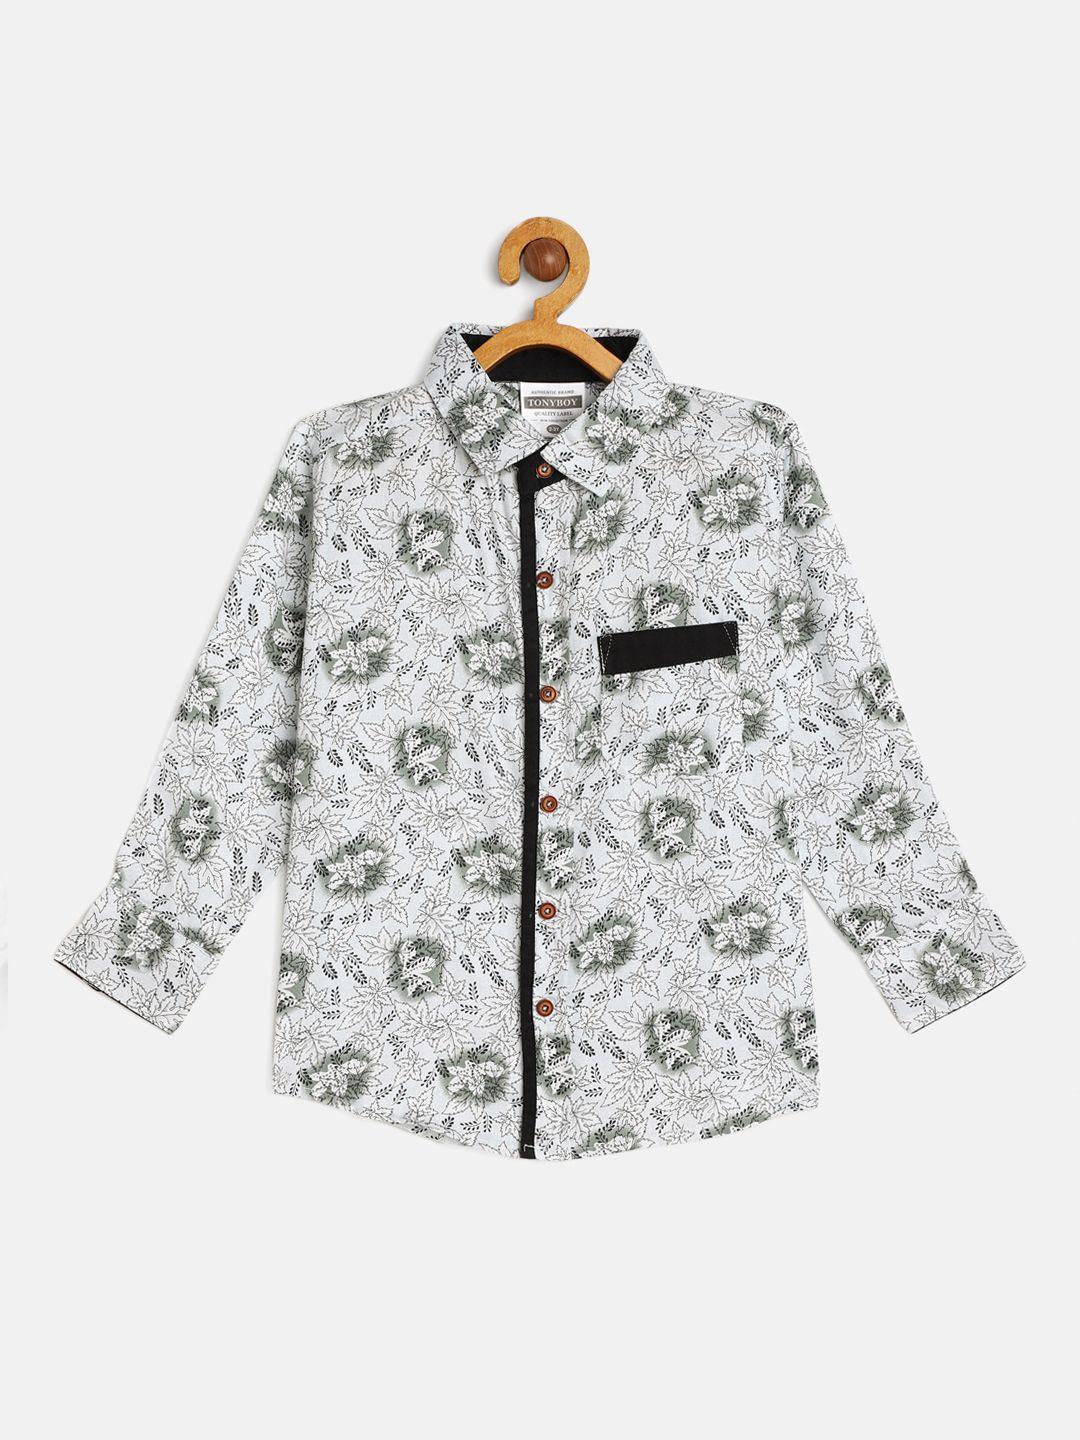 tonyboy boys off-white & green printed regular fit pure cotton casual shirt